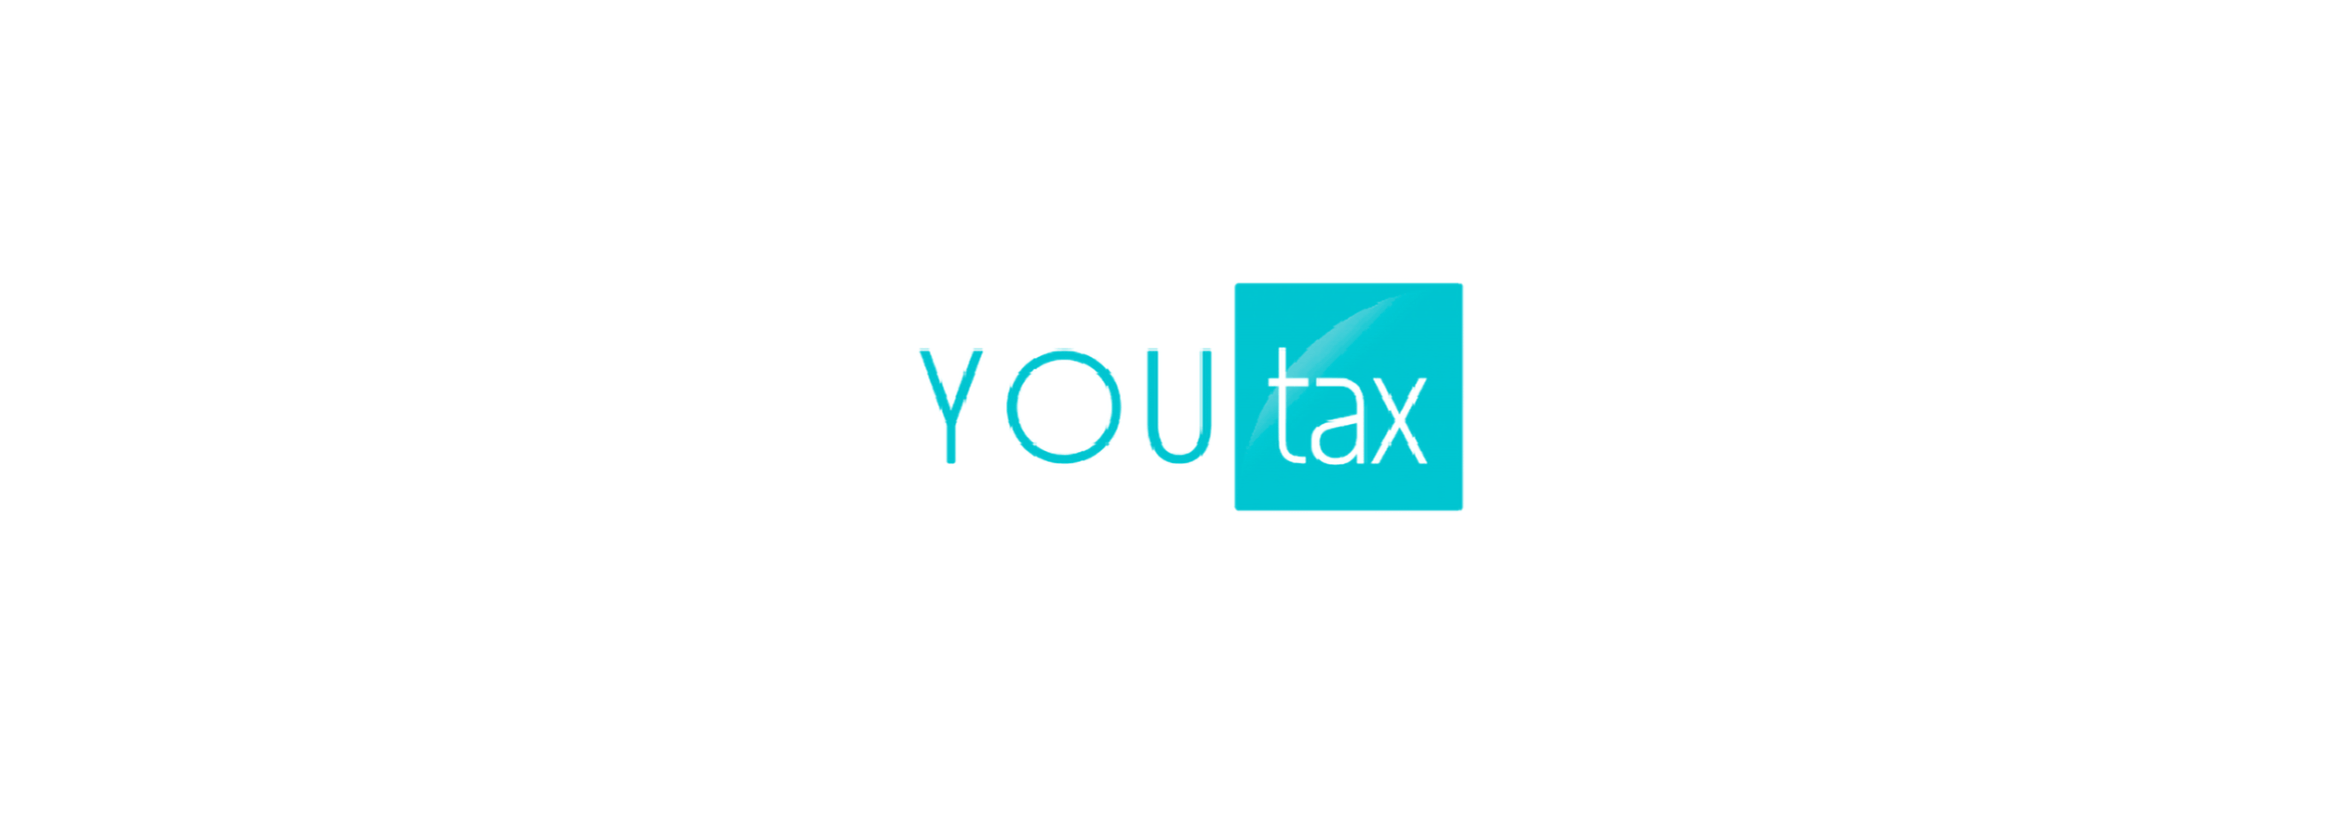 The YOUtax logo